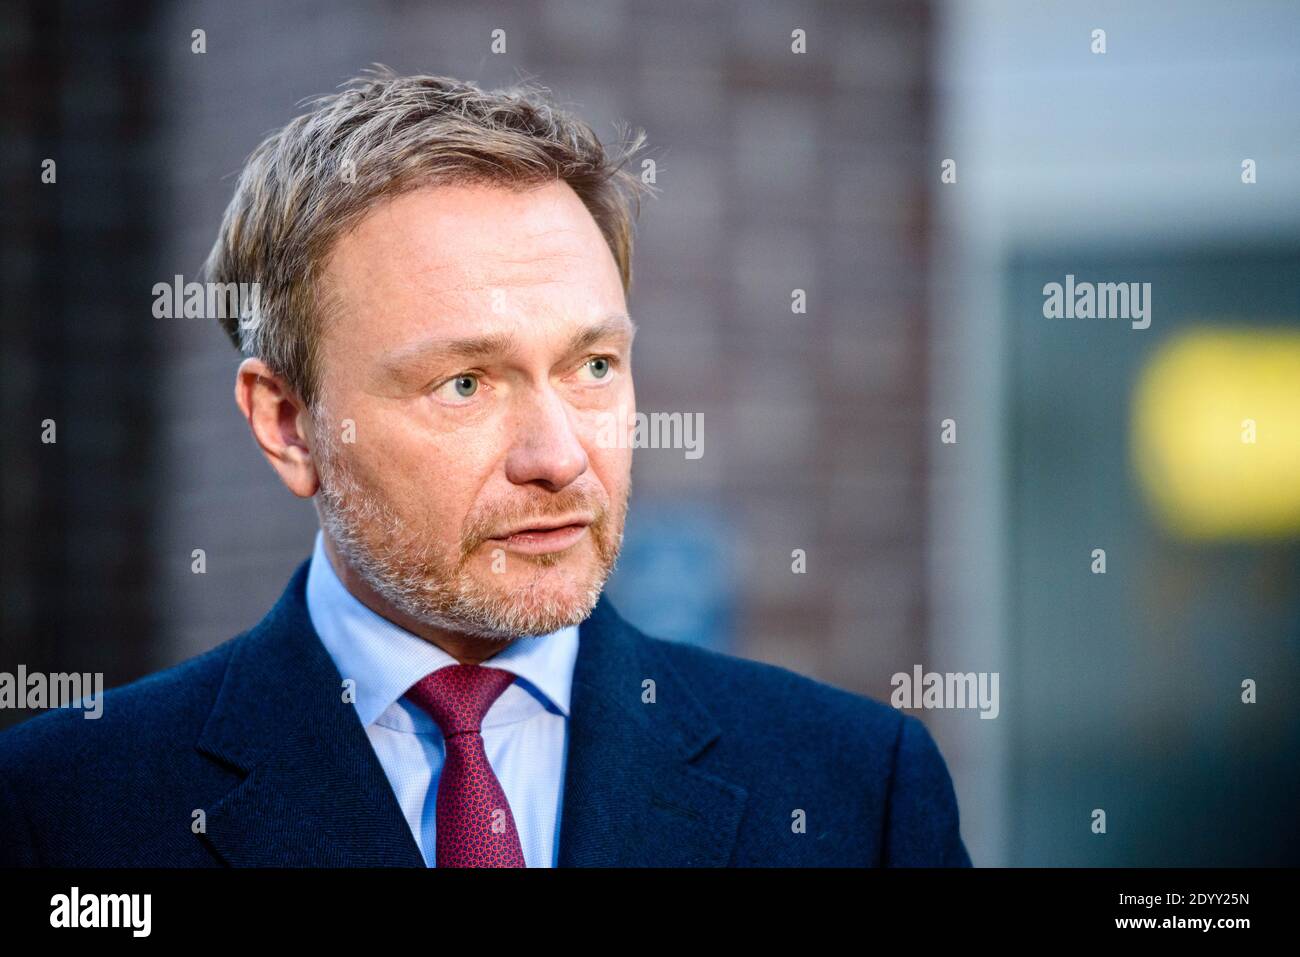 Berlin, Germany. 28th Dec, 2020. Germany, Berlin, December 28, 2020: CHRISTIAN LINDNER, Member of the Bundestag and Federal Chairman of the FDP (Freie Demokratische Partei), can be seen during a statement for various TV stations on the current situation regarding the ongoing Covid-19 pandemic and the vaccination strategy of the German government. (Photo by Jan Scheunert/Sipa USA) Credit: Sipa USA/Alamy Live News Stock Photo